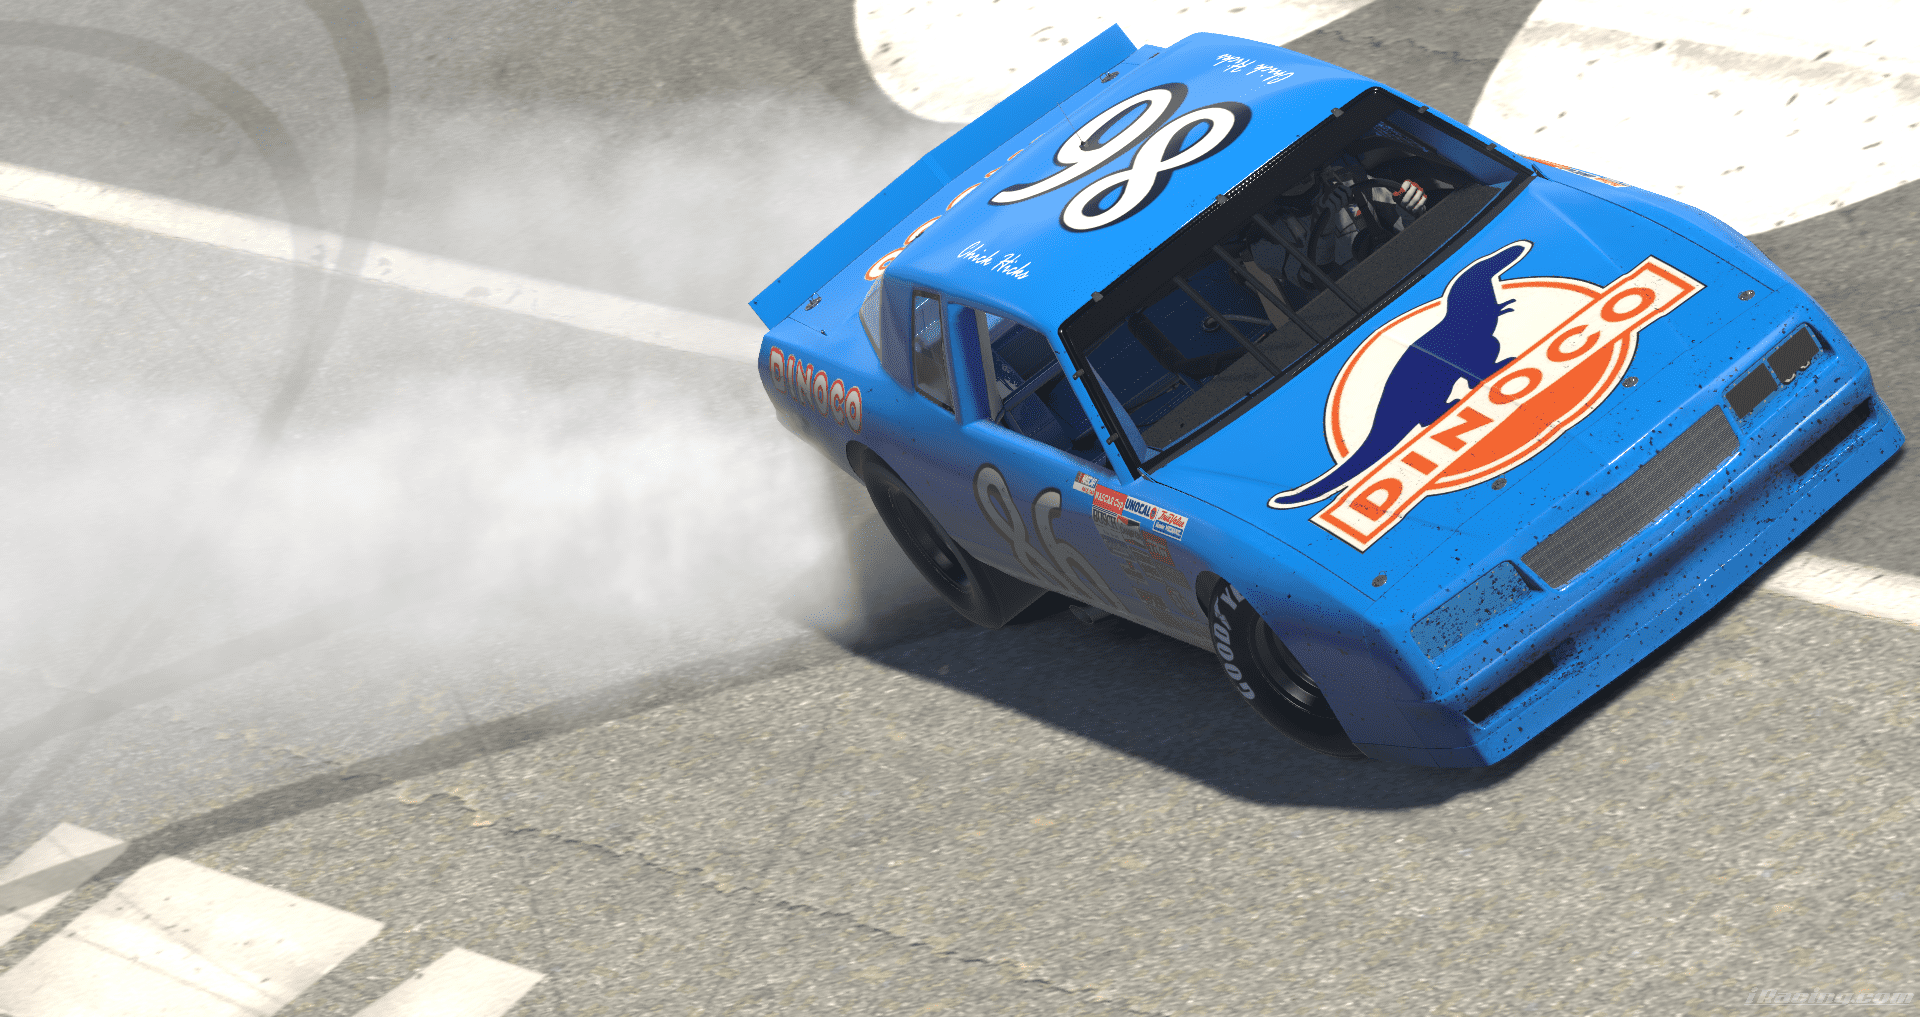 Tyler Garey overcame adversity to win the Legends of the Future Series at Altanta Motor Speedway on iRacing.